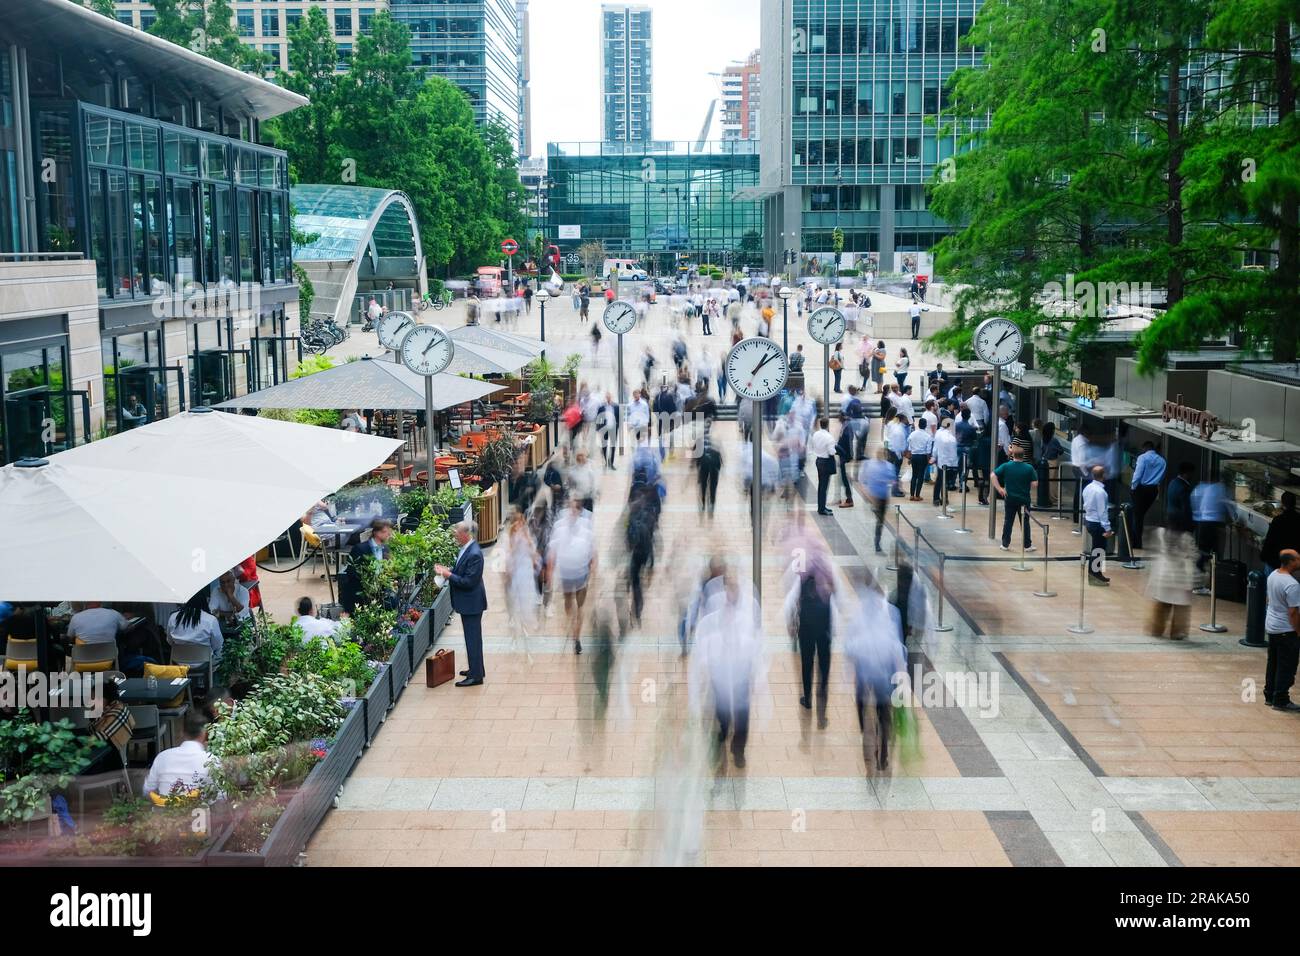 London- June 2023: Motion blurred business people in Reuters Plaza, London's Canary Wharf financial district. Stock Photo